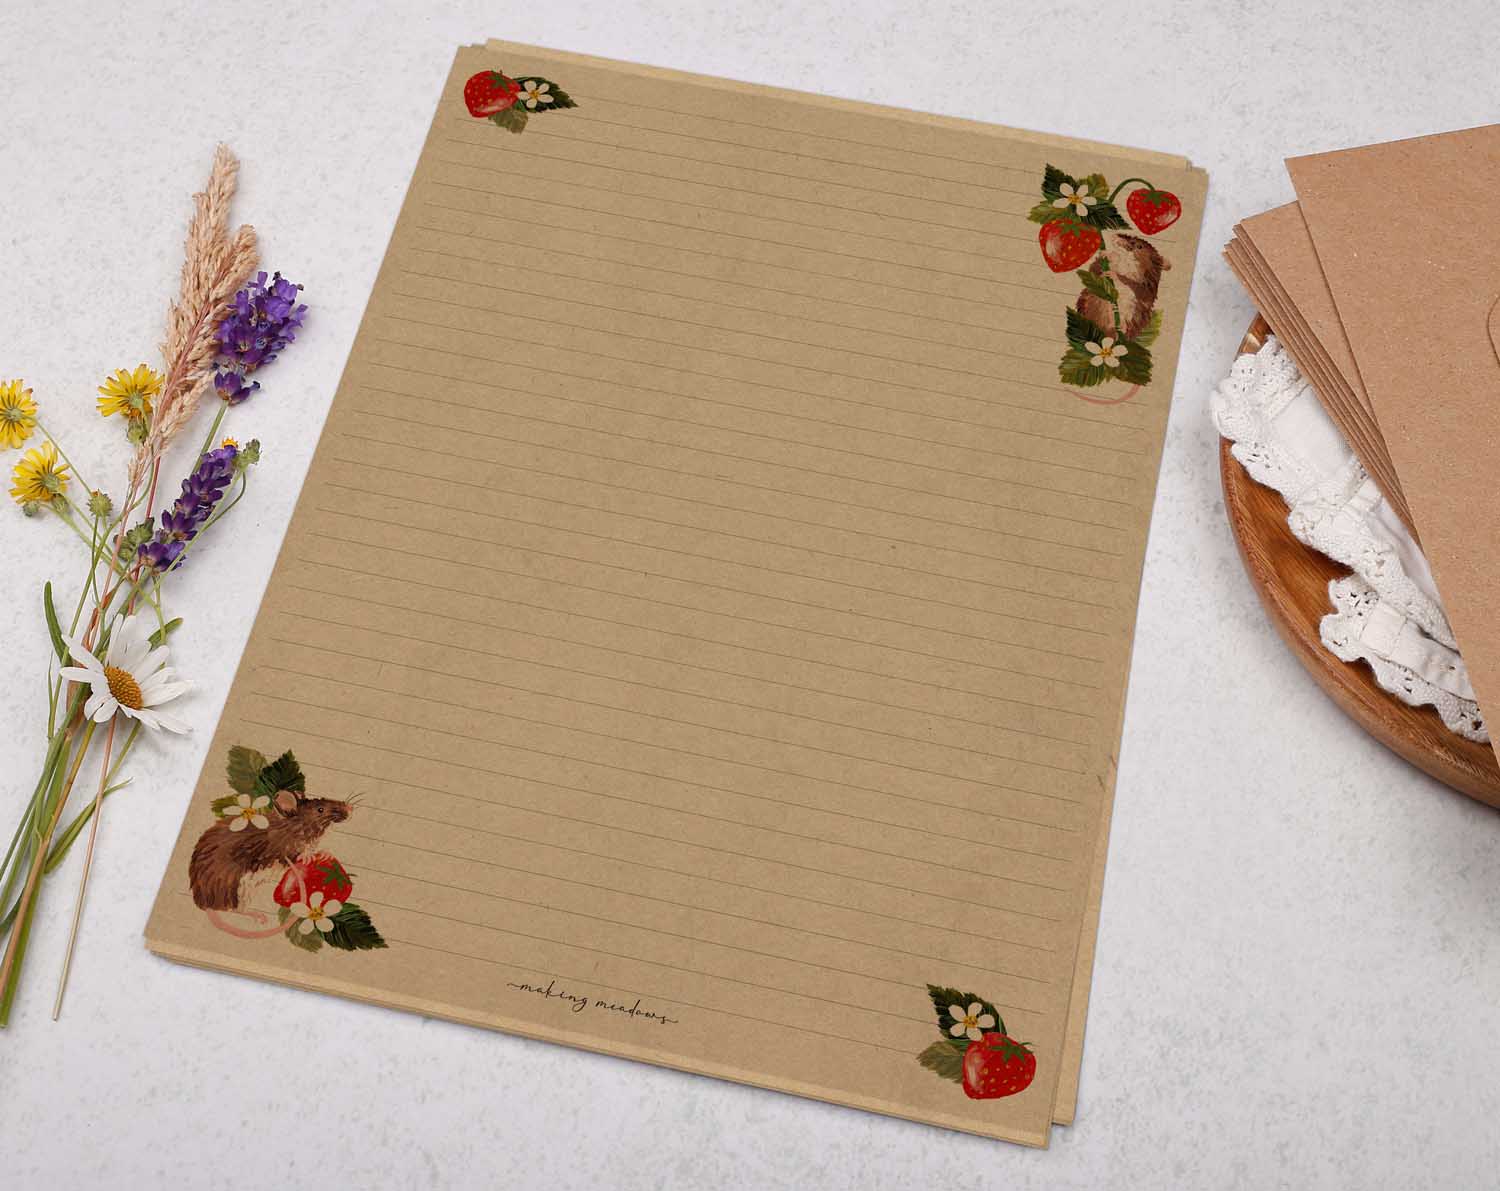 A4 Kraft letter writing paper sheets with an adorable field mice and strawberry design.